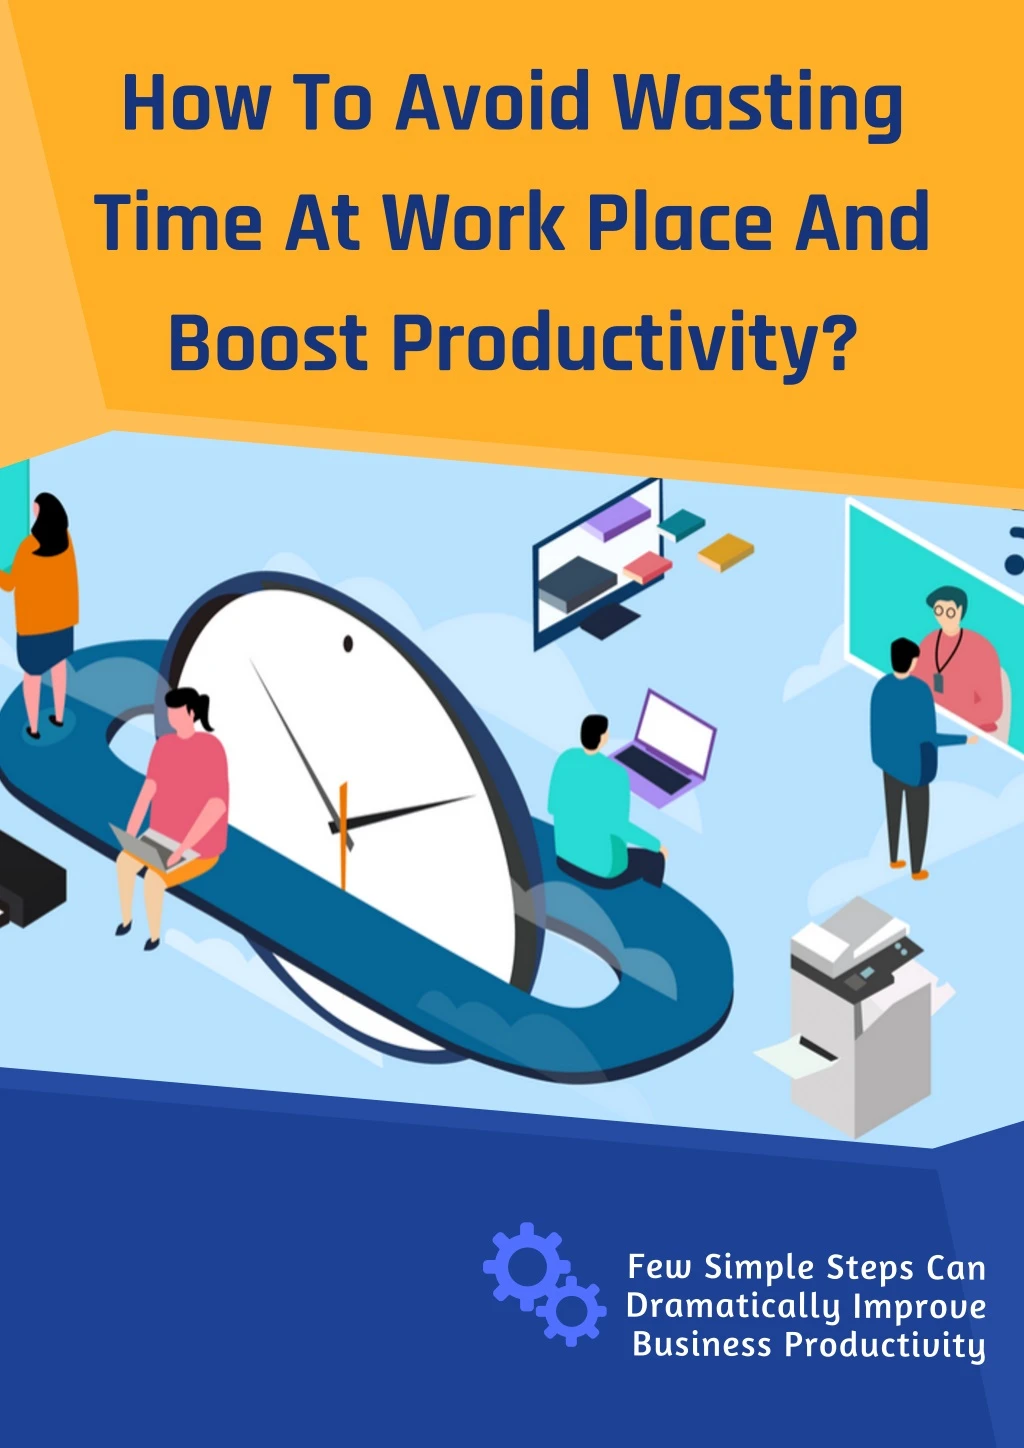 how to avoid wasting time at work place and boost